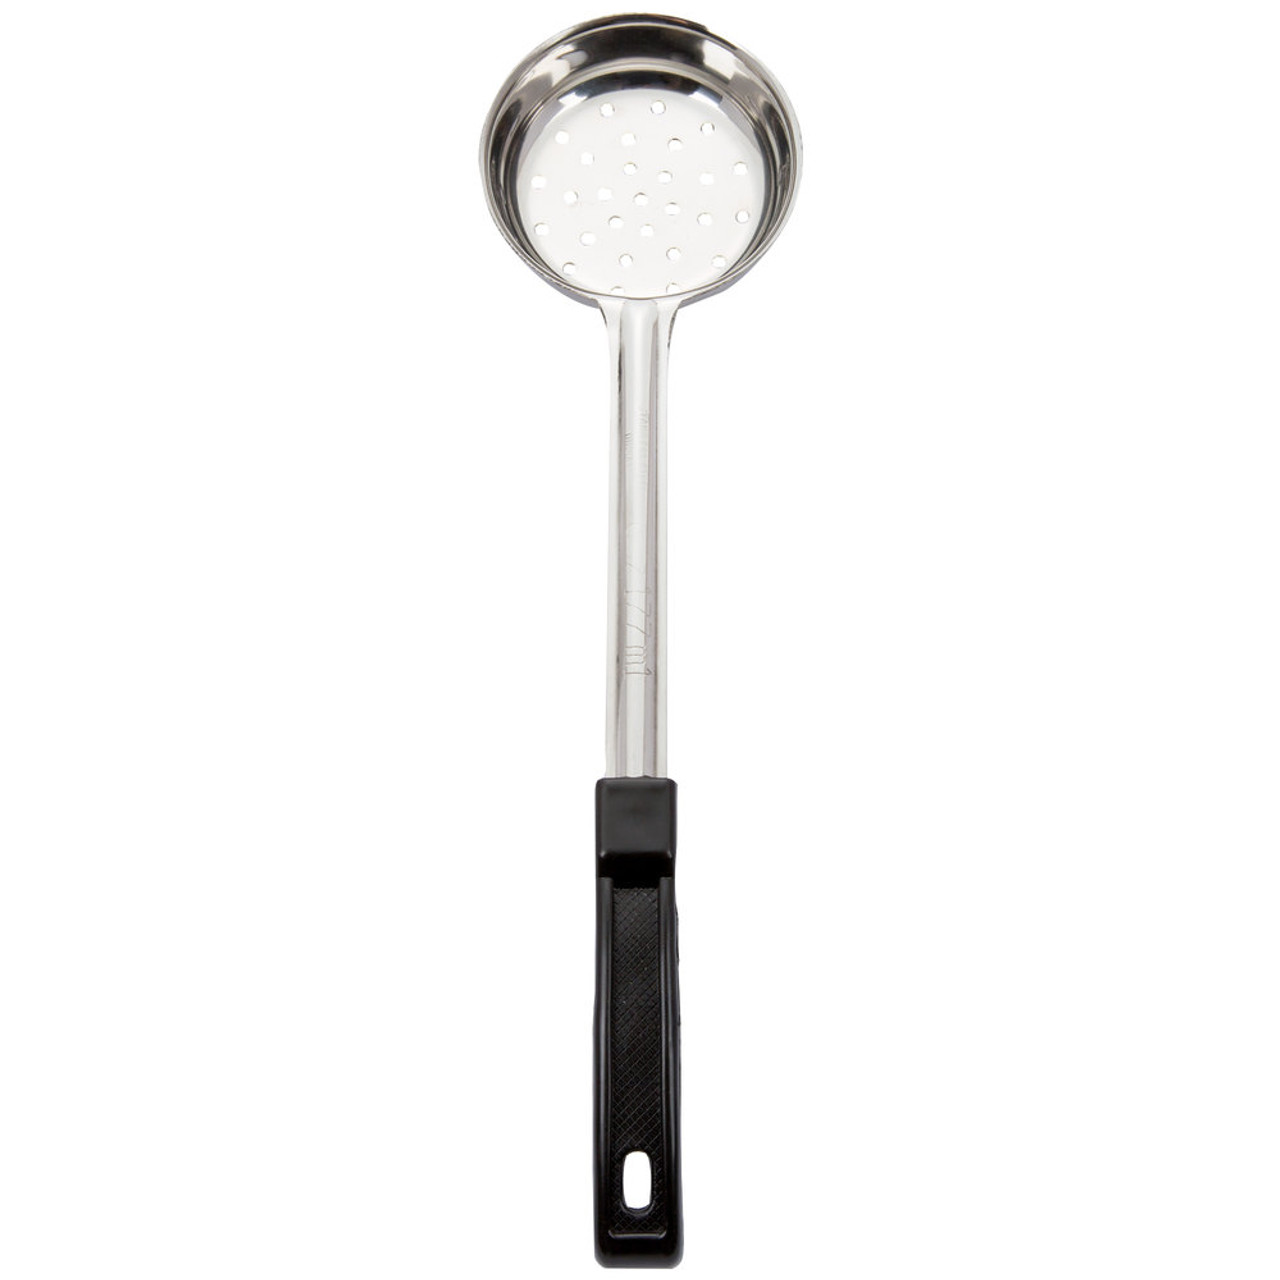 6 oz. One-Piece Perforated Portion Spoon